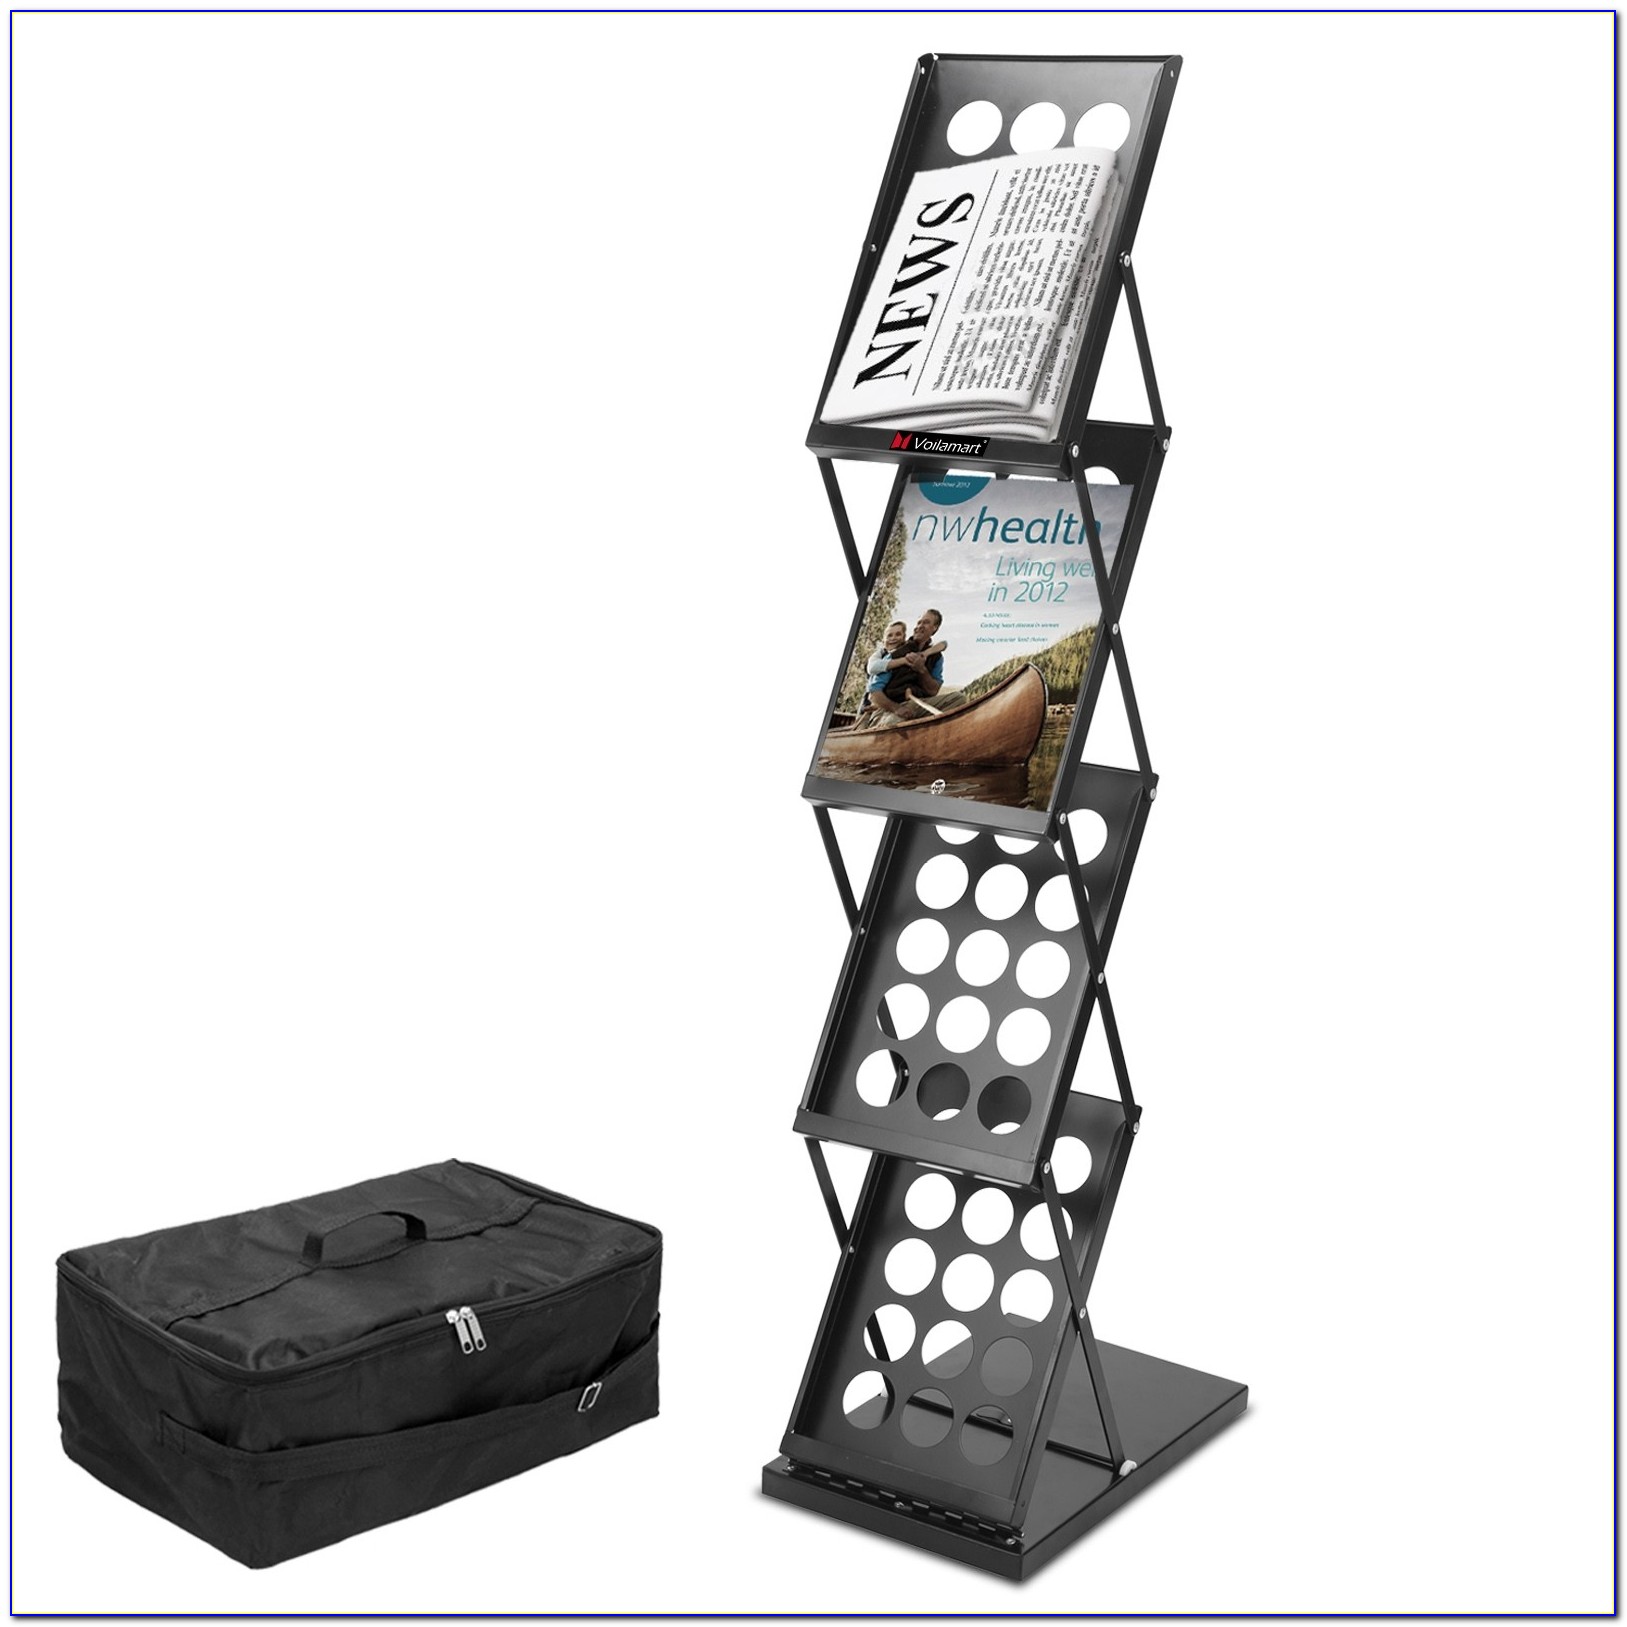 Collapsible Literature Stand